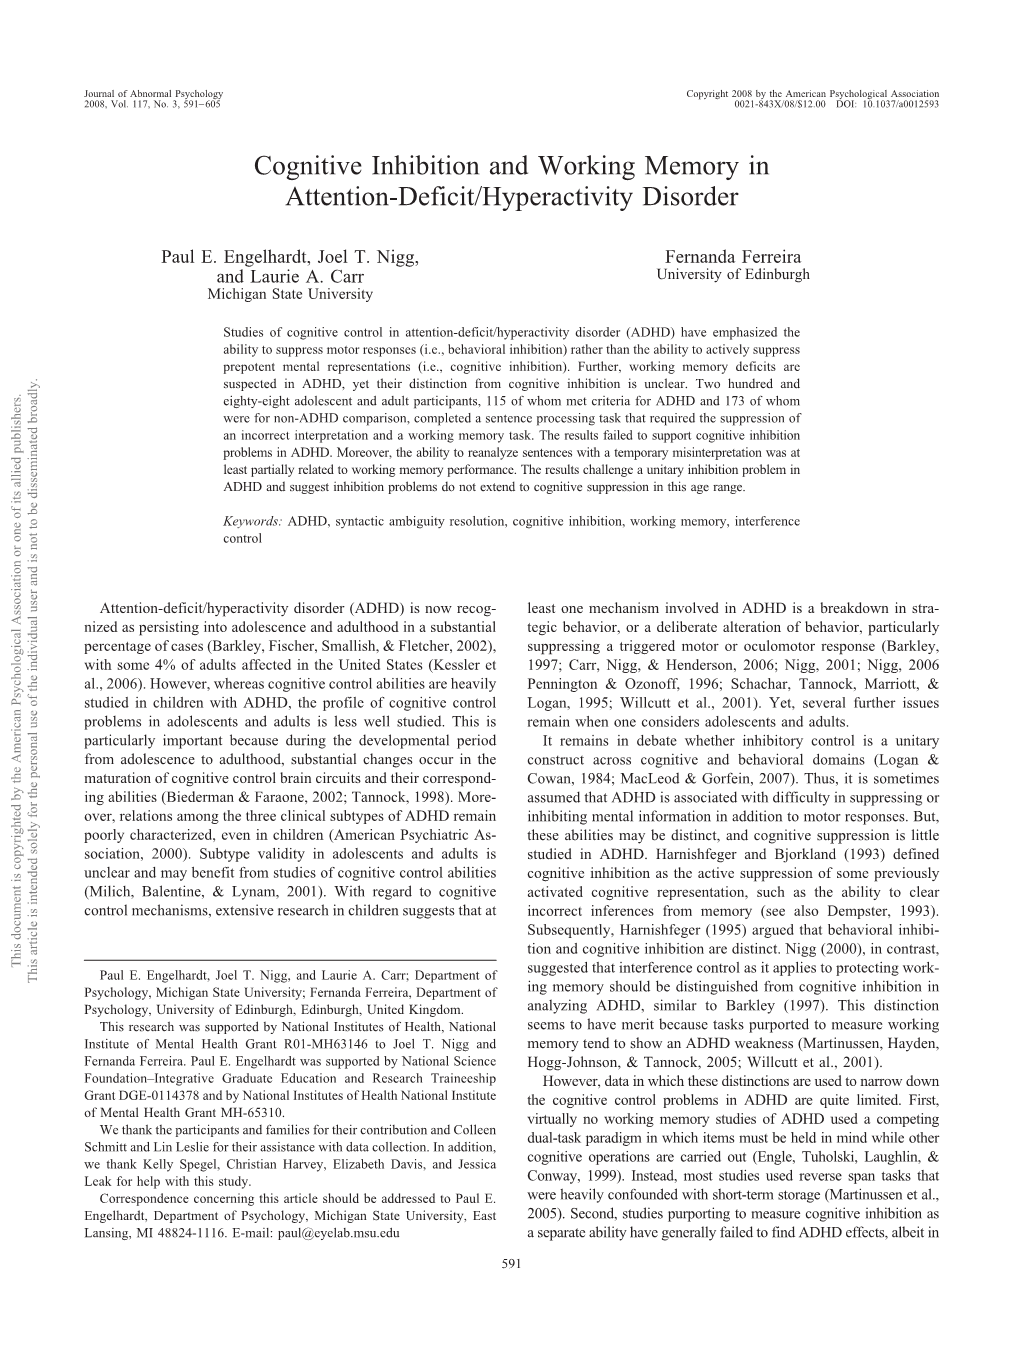 Cognitive Inhibition and Working Memory in Attention-Deficit/Hyperactivity Disorder